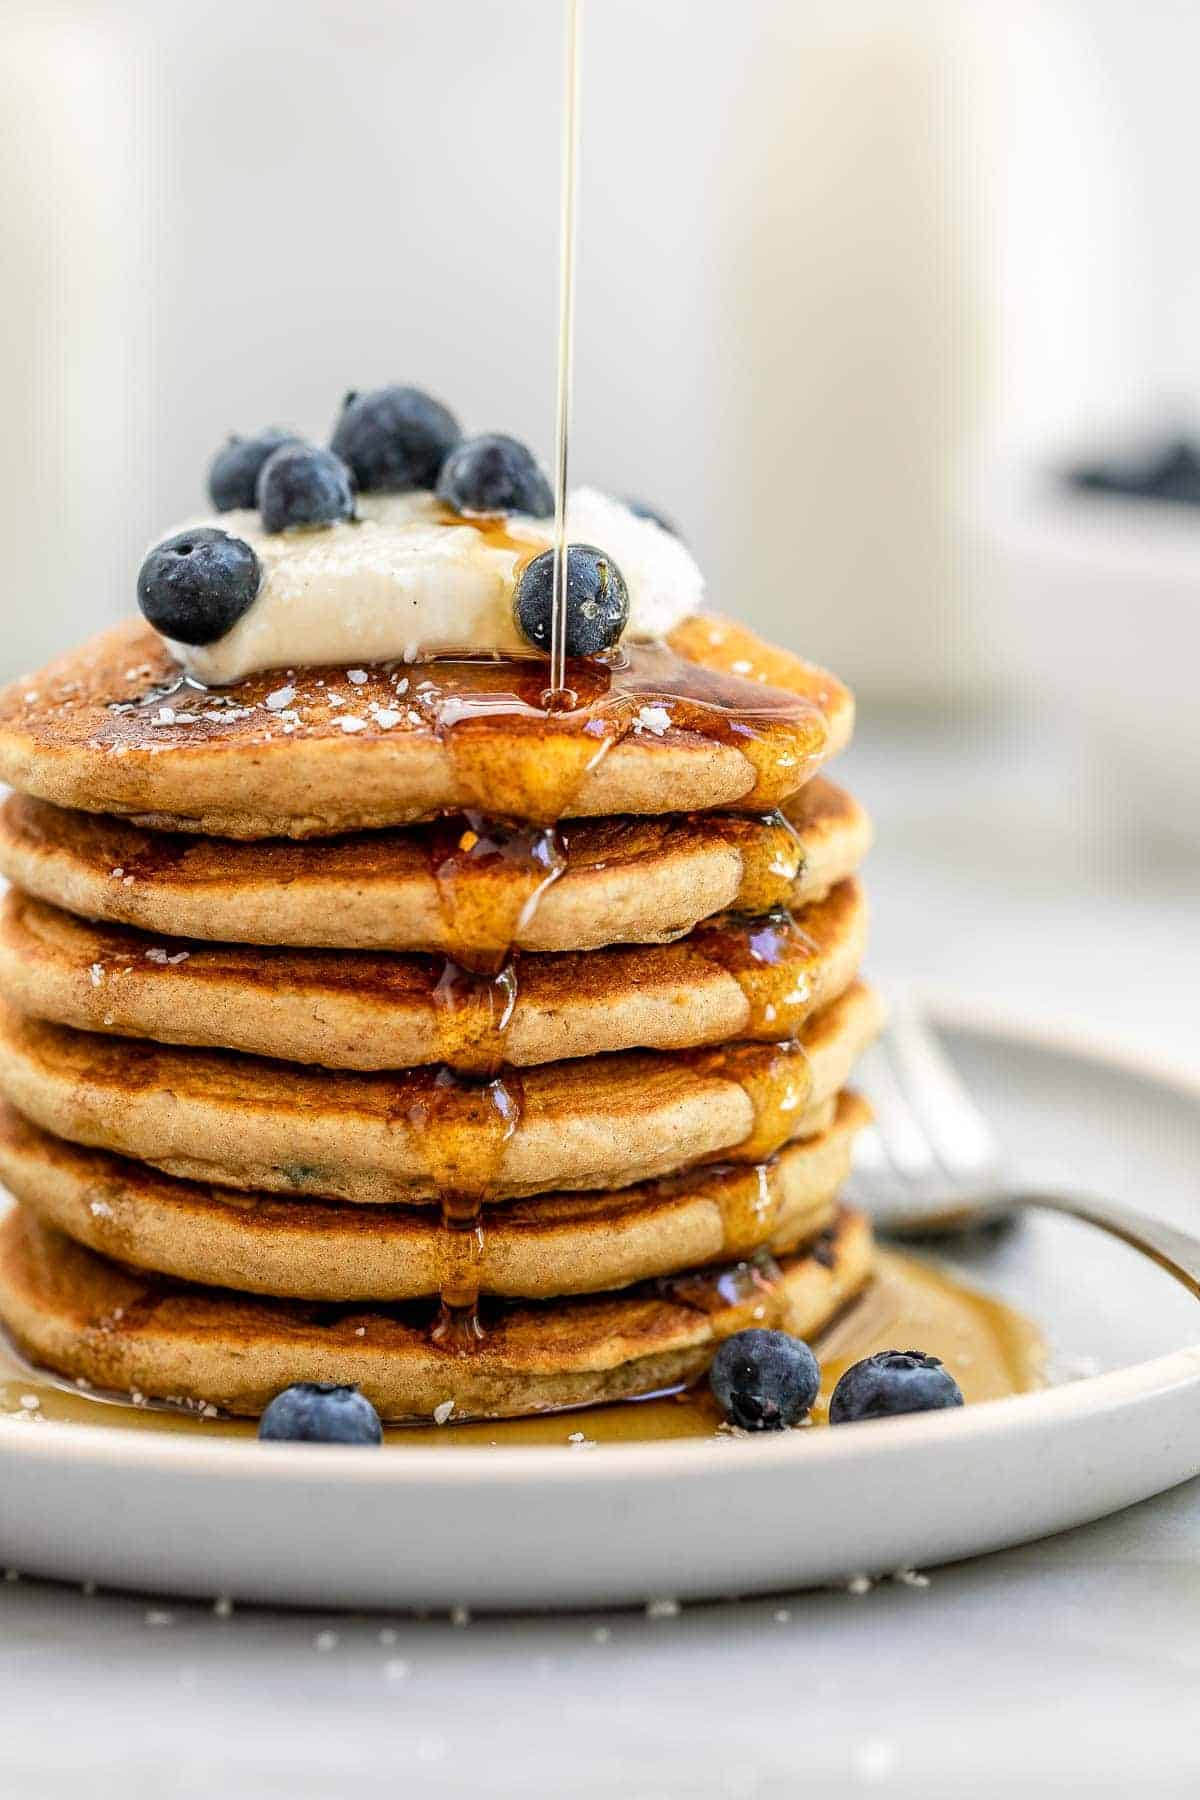 Up close image of the stack of vegan pancakes with maple syrup dripping down the side.